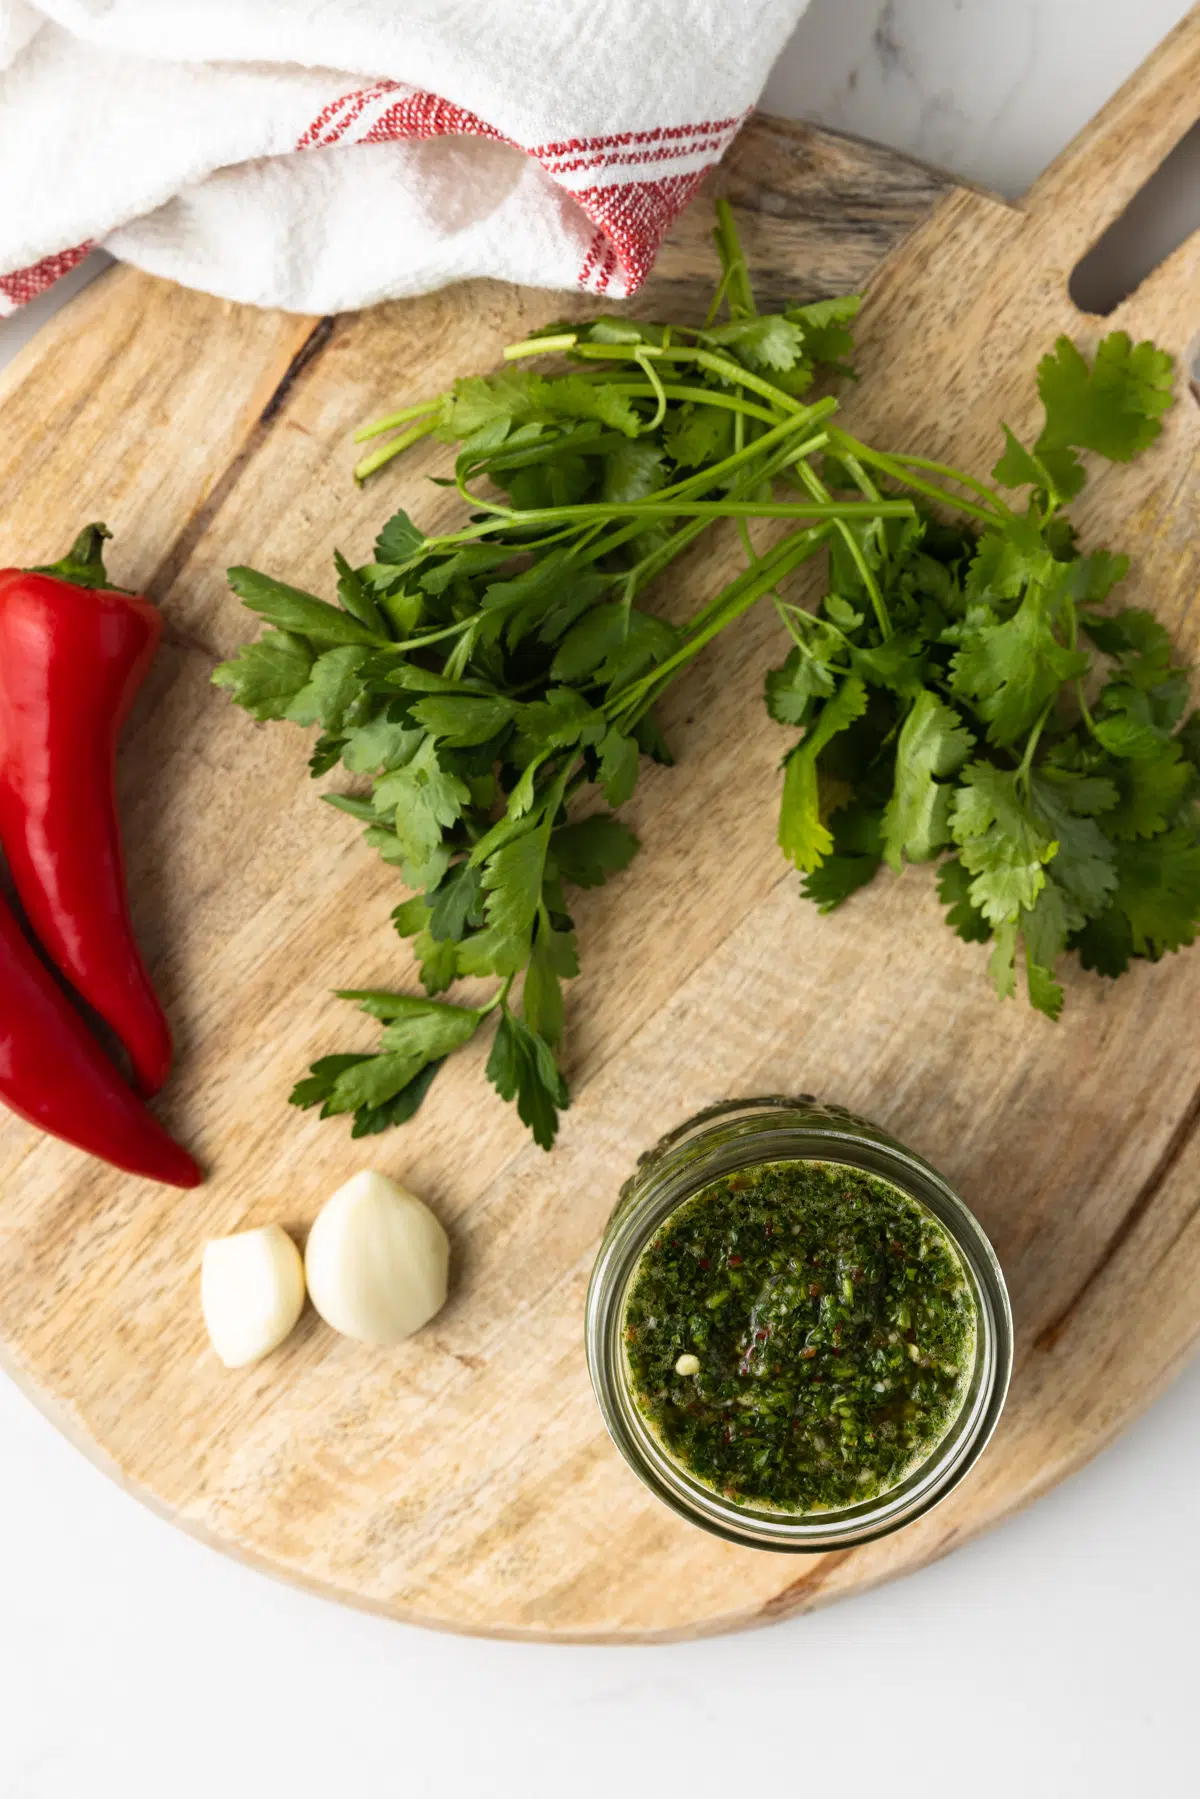 Overheat of chimichurri with ingredients on rough wooden board.